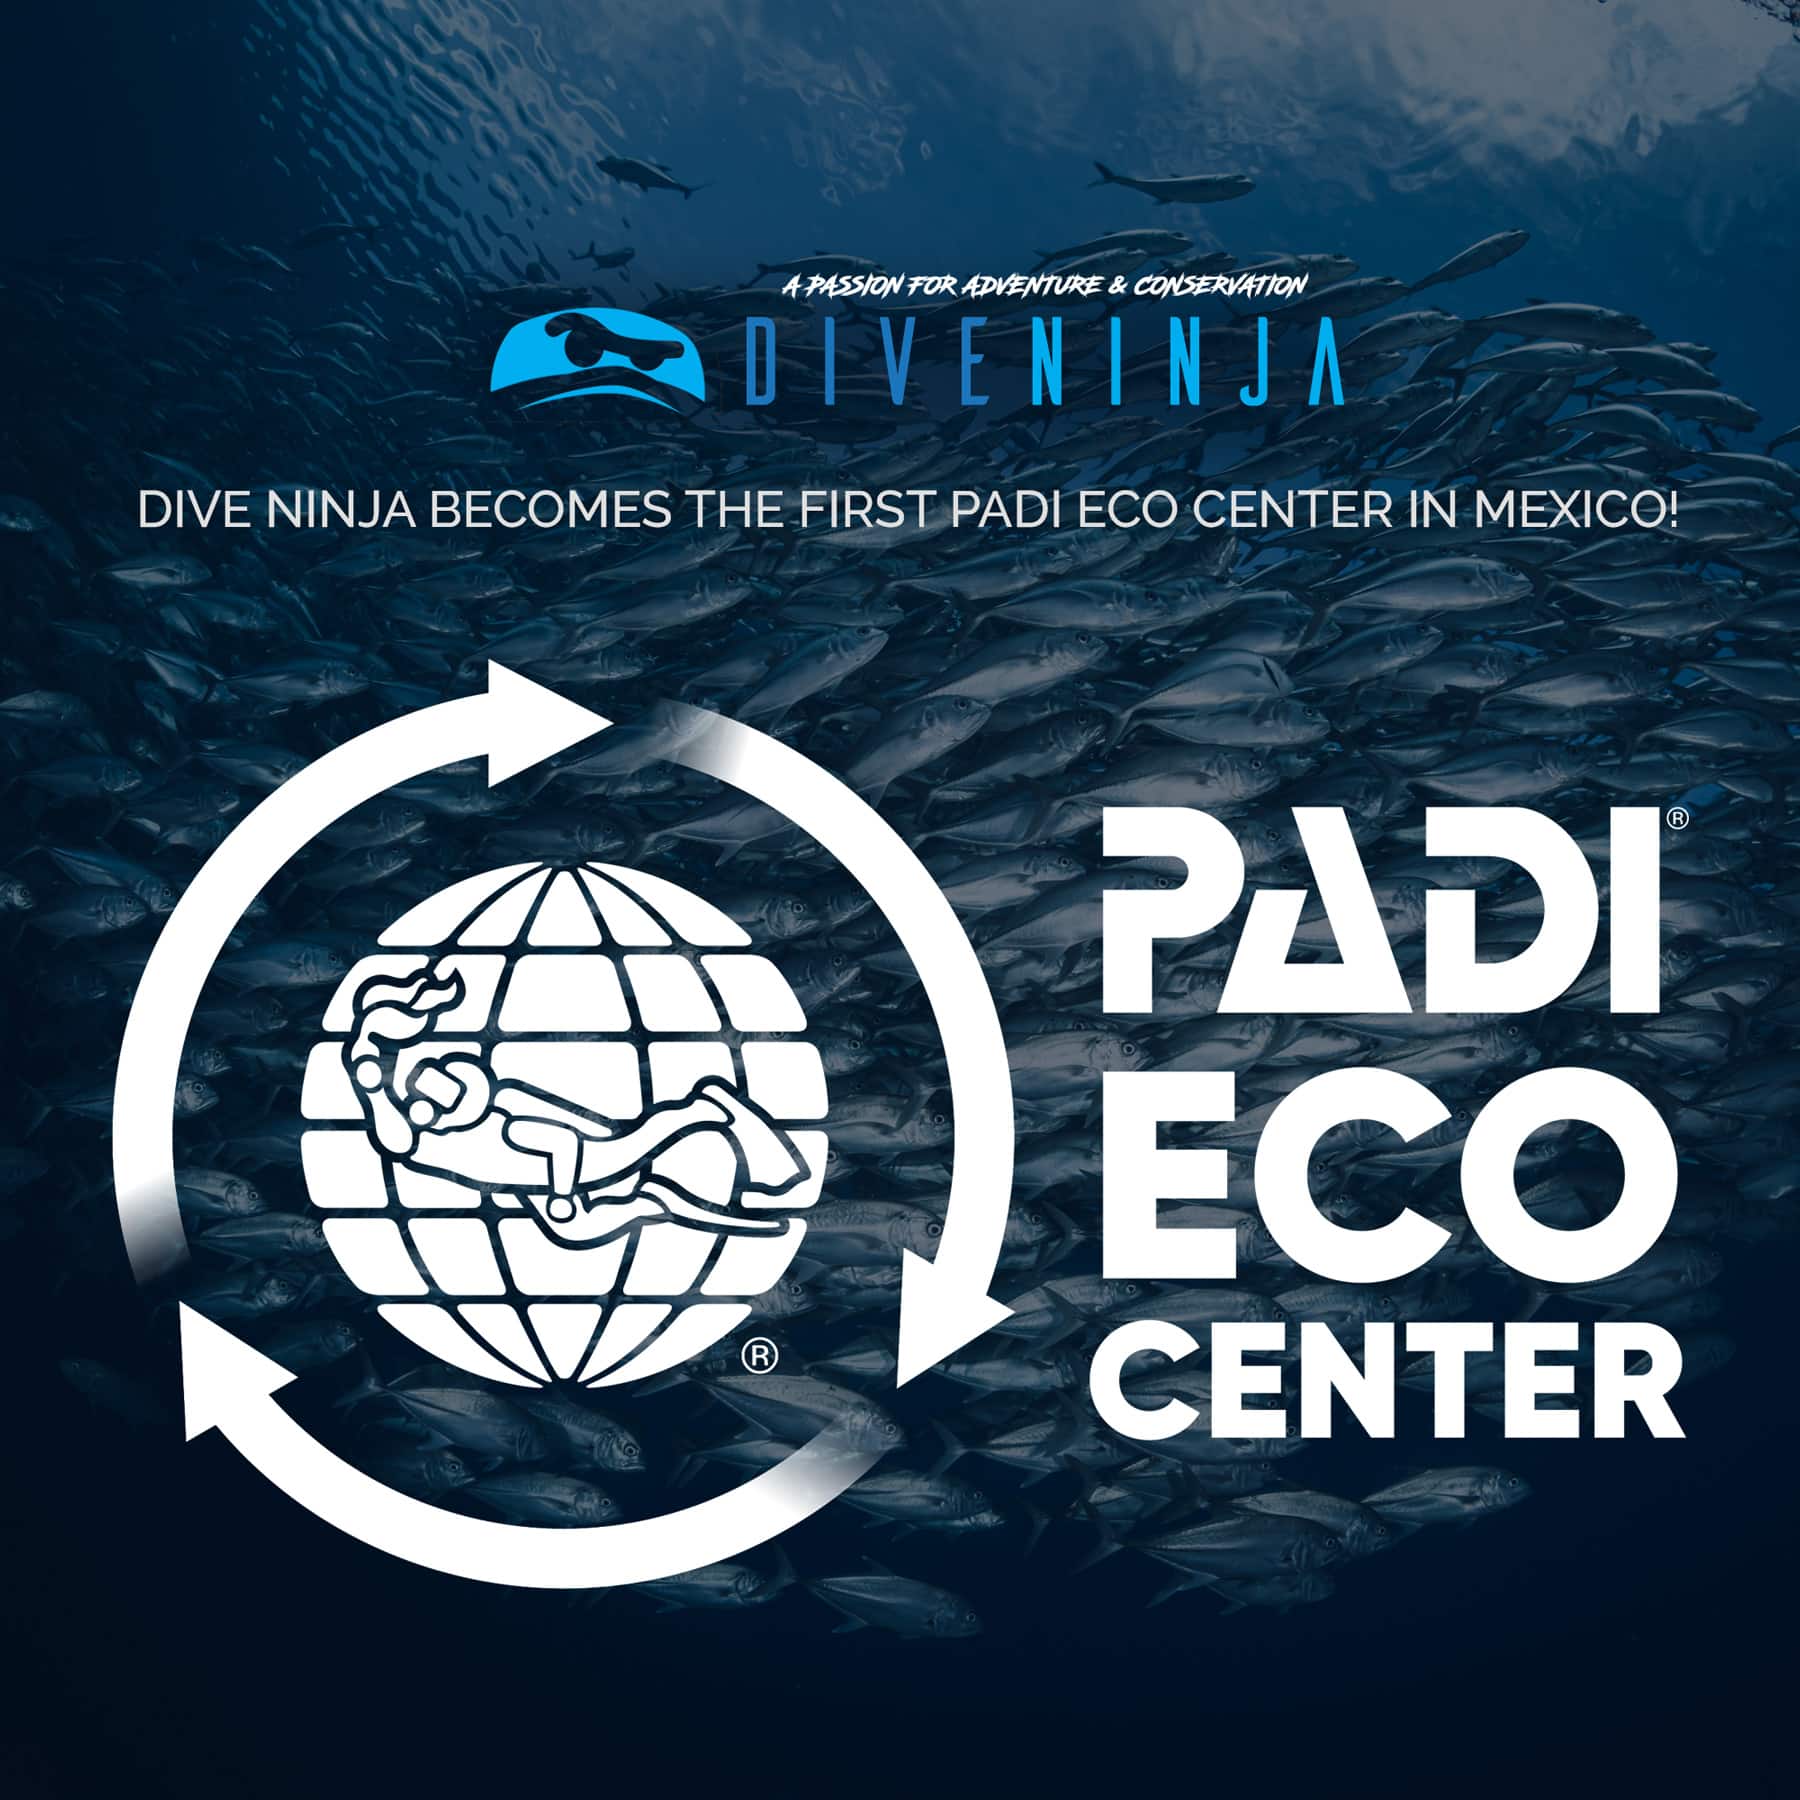 Dive Ninja becomes first PADI Eco Center in Mexico!